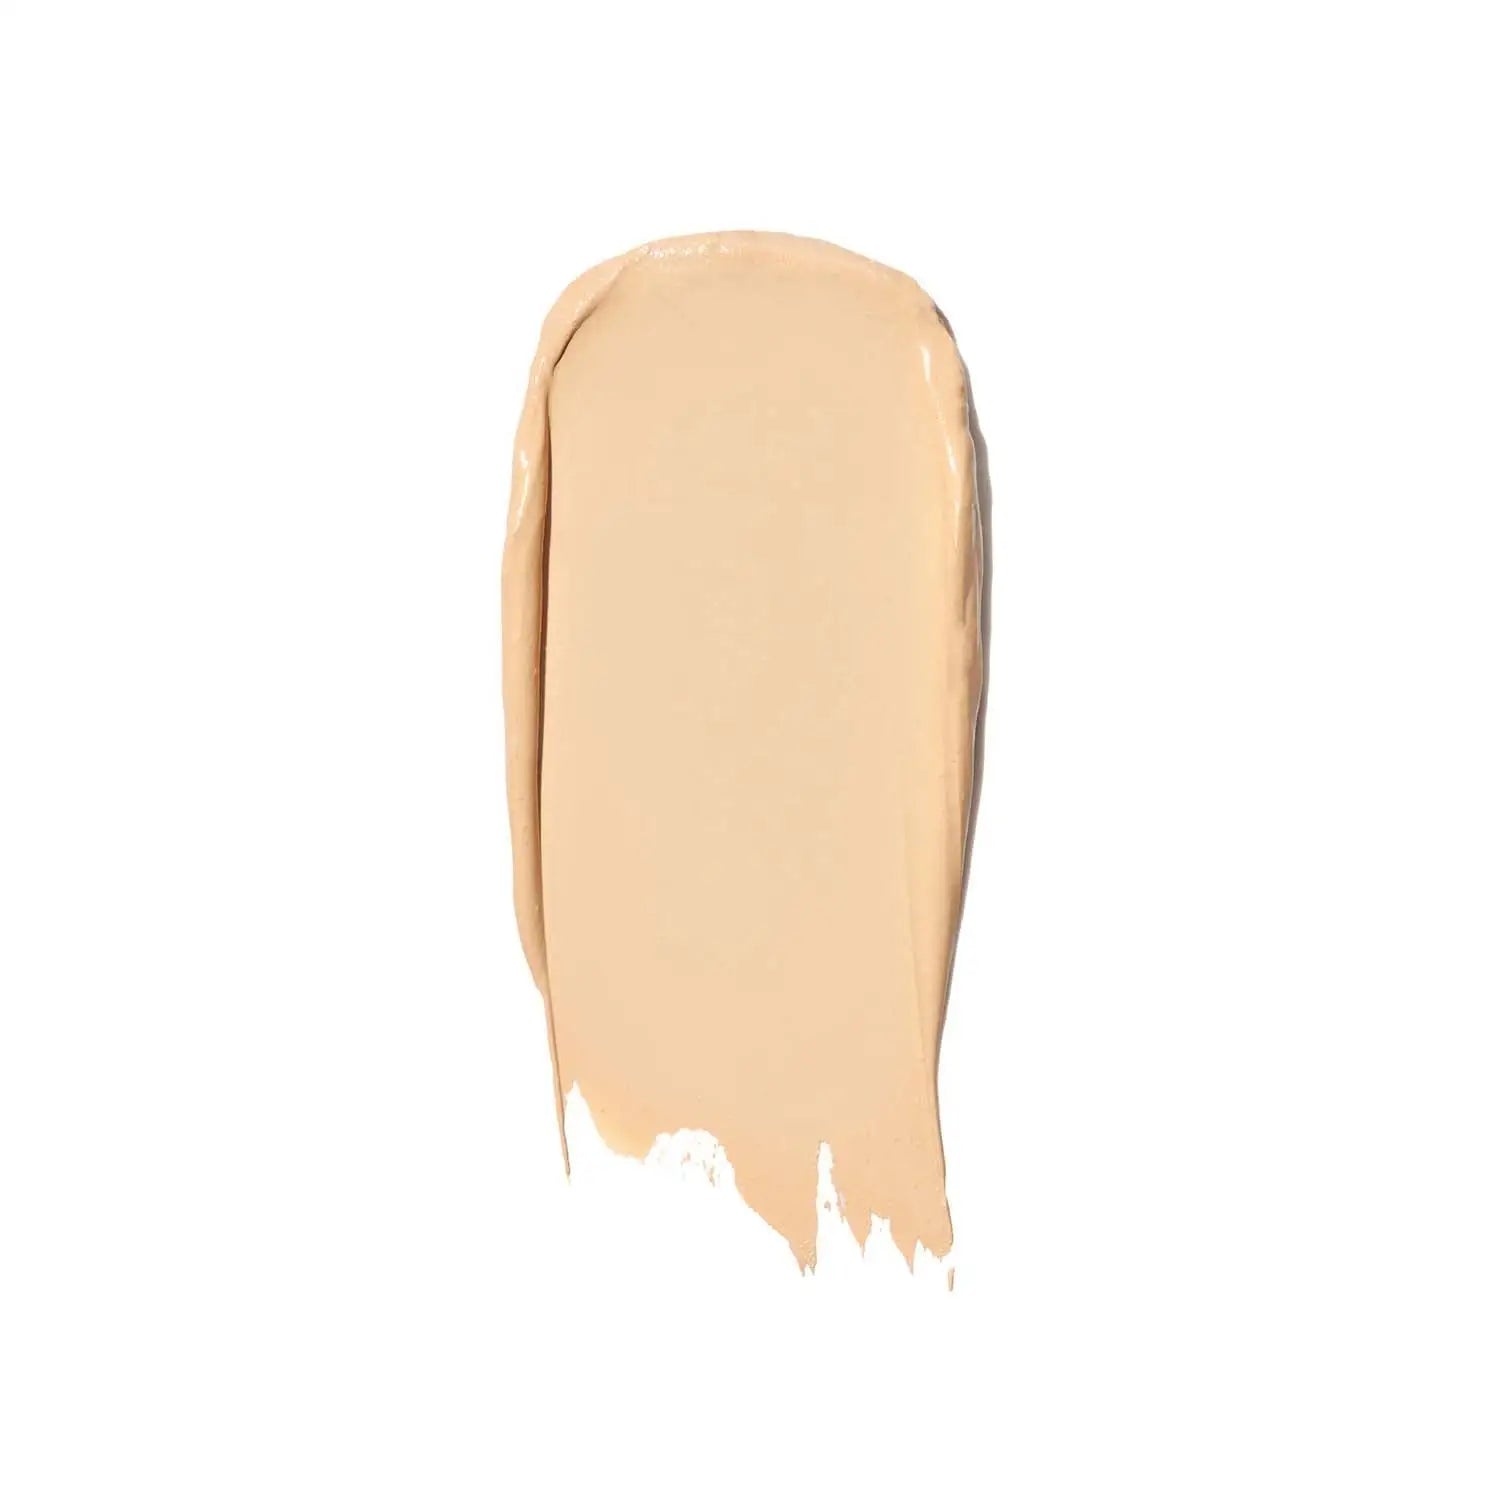 RMS Beauty Un' Cover-up Cream Foundation, 30ml - 22.5